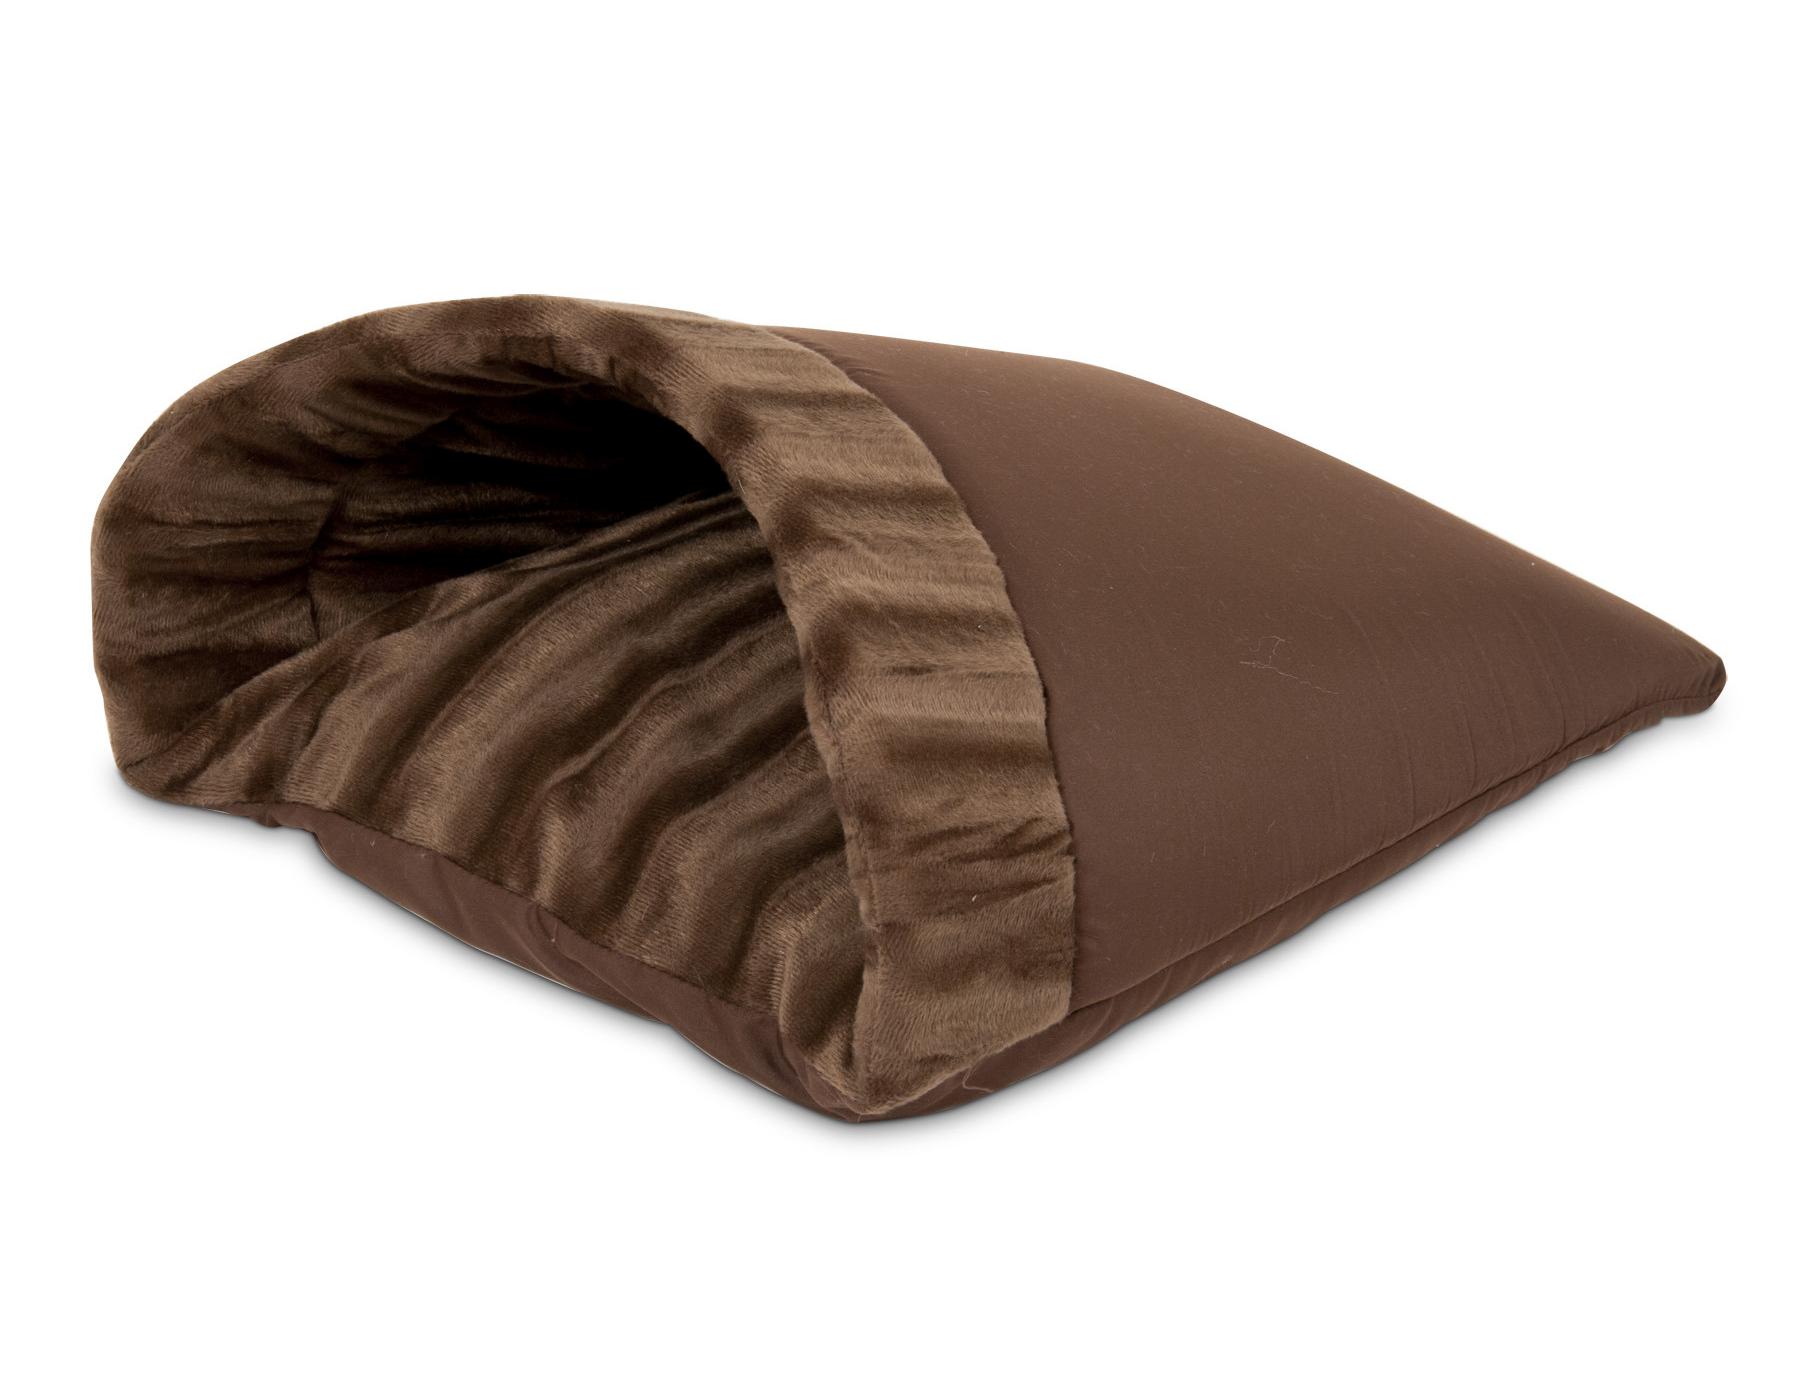 Aspen Pet Products 18 inch x 16 inch Brown Kitty Cave; image 1 of 2